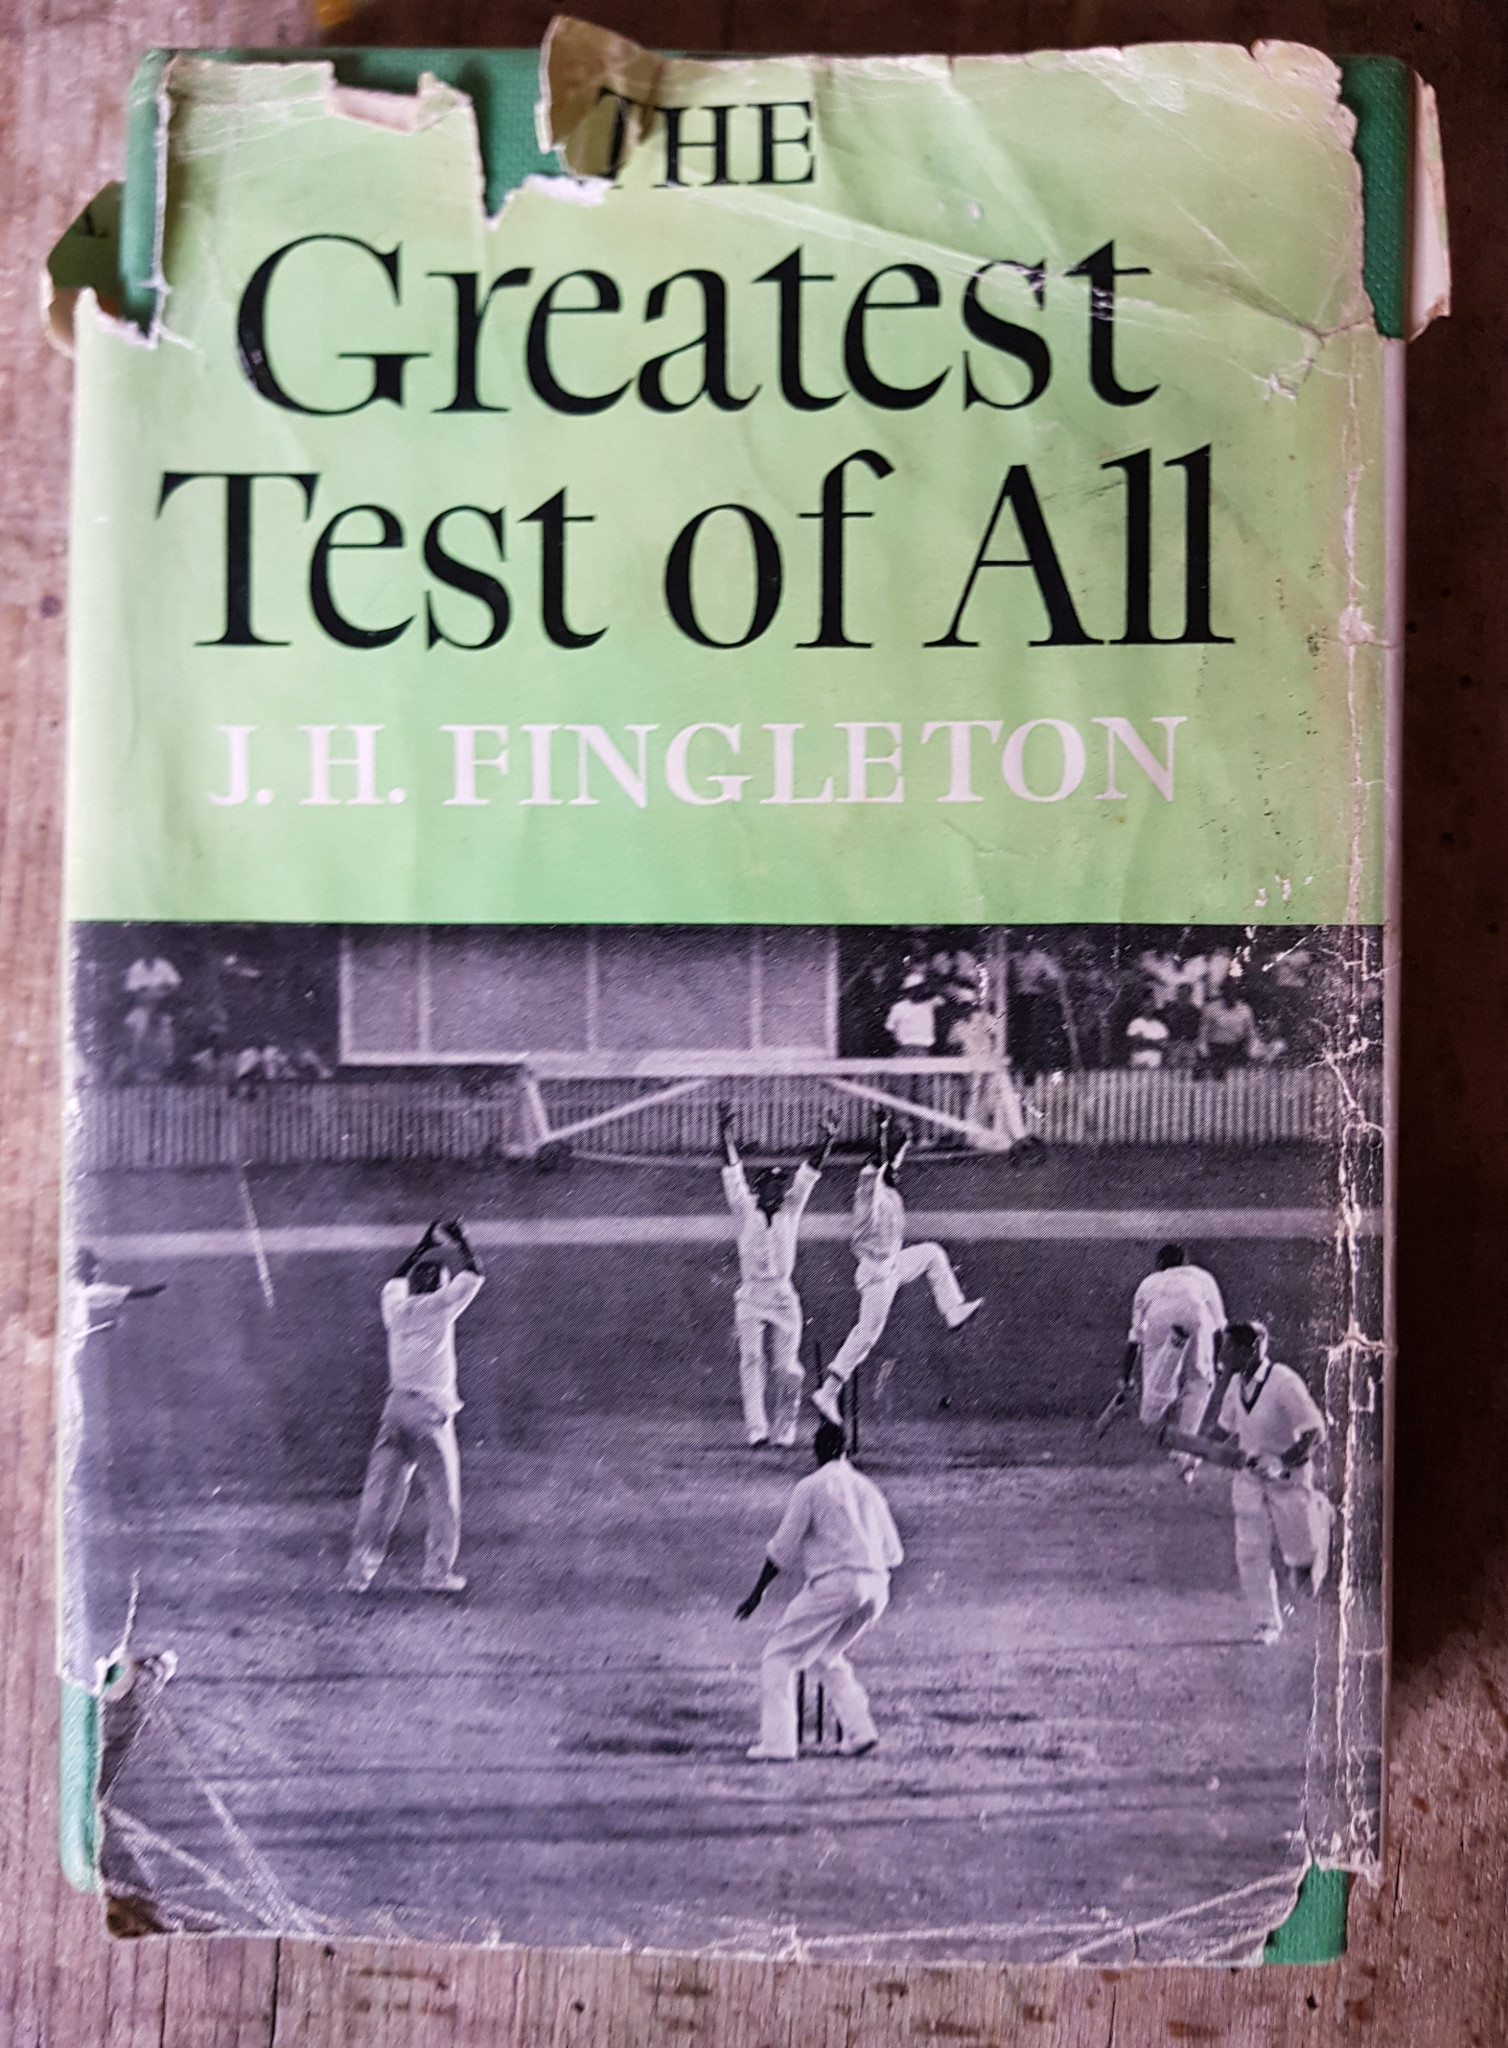 David Owen's well-travelled copy of J.H.Fingleton’s book on the first-ever tied Test match ©David Owen